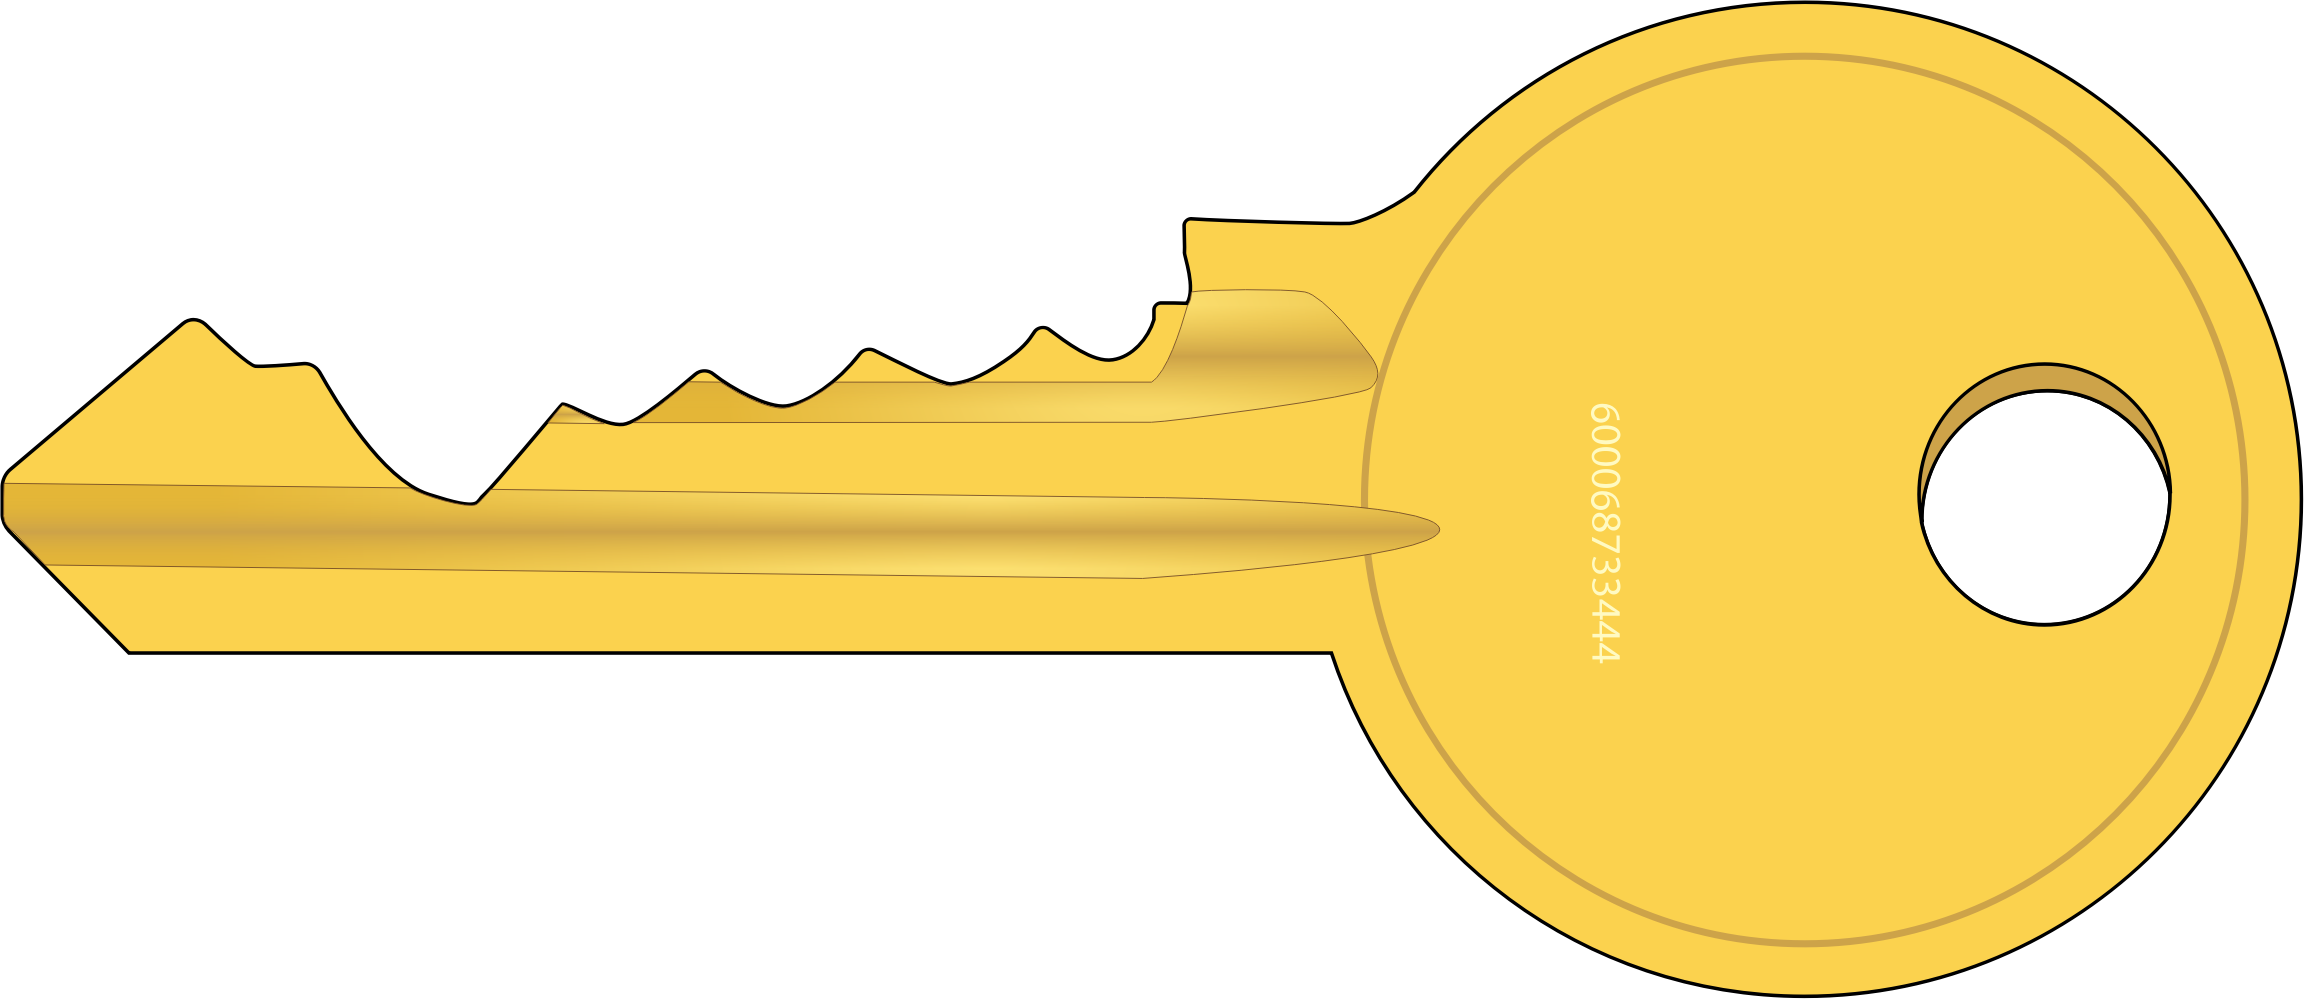 Cylinder Lock Key By Fred The Oyster